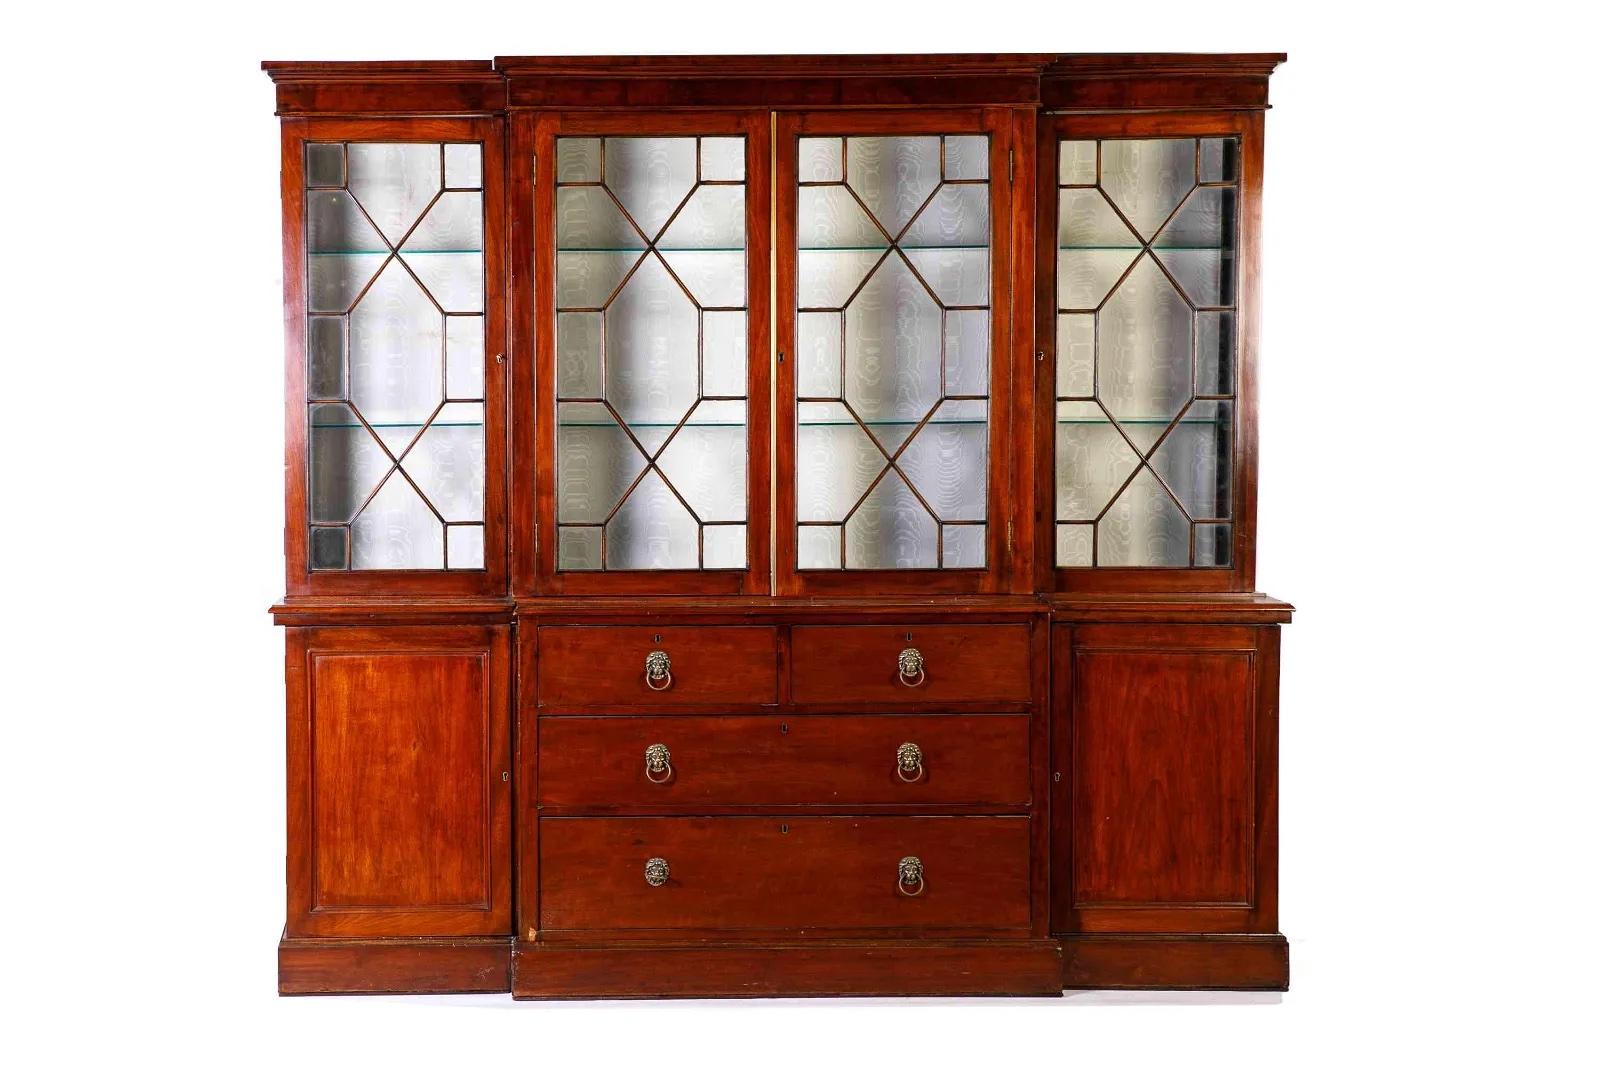 George III Period mahogany breakfront interior fitted  with desk pigeonholes, silk lining and fitted lighting.